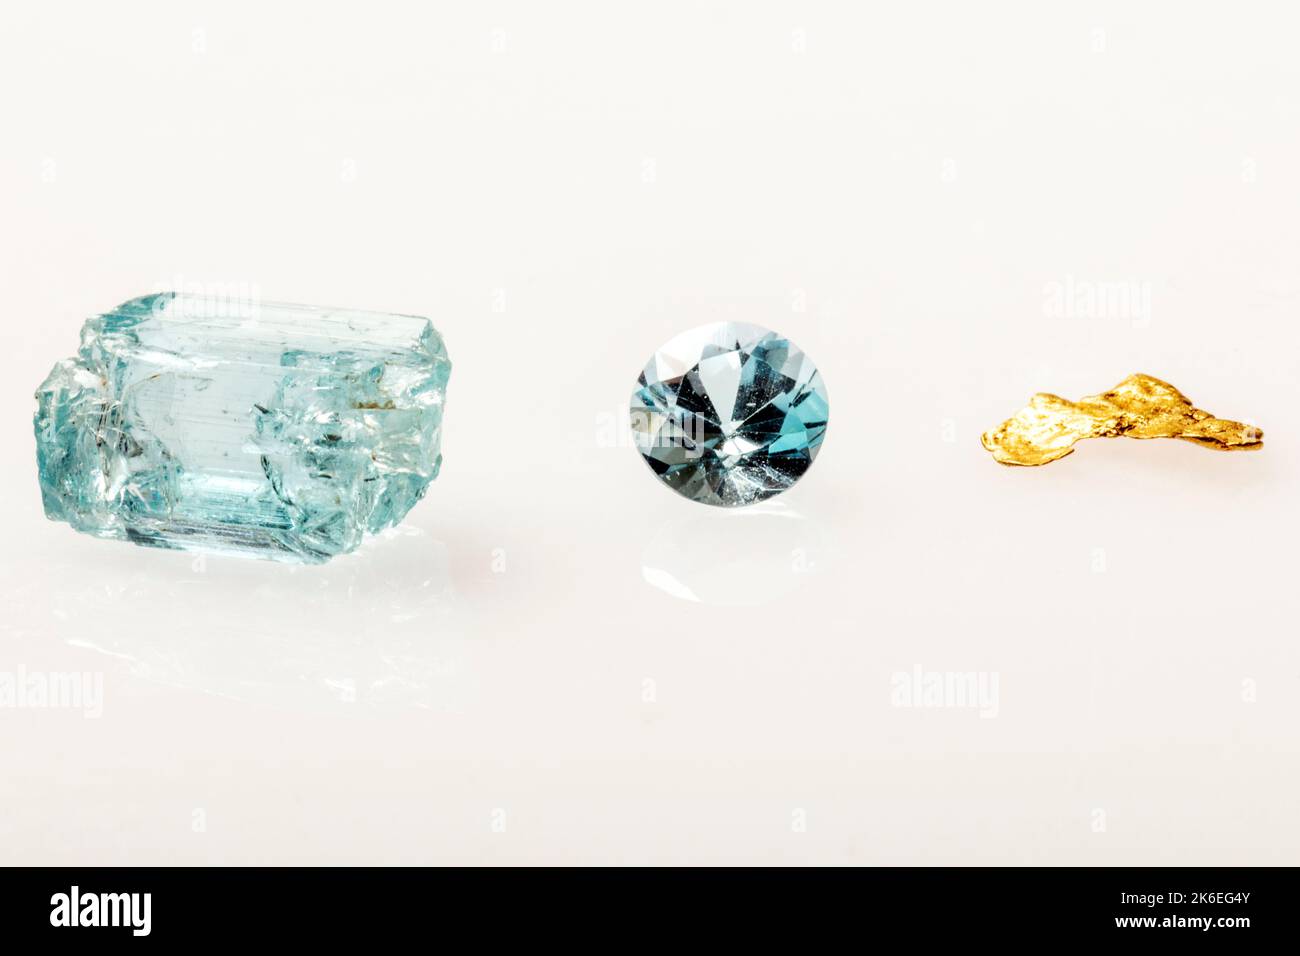 Raw aquamarine; faceted aquamarine gemstone & gold nugget mined by famous prospector; Brian Busse; American Gemtracker; Colorado; USA Stock Photo